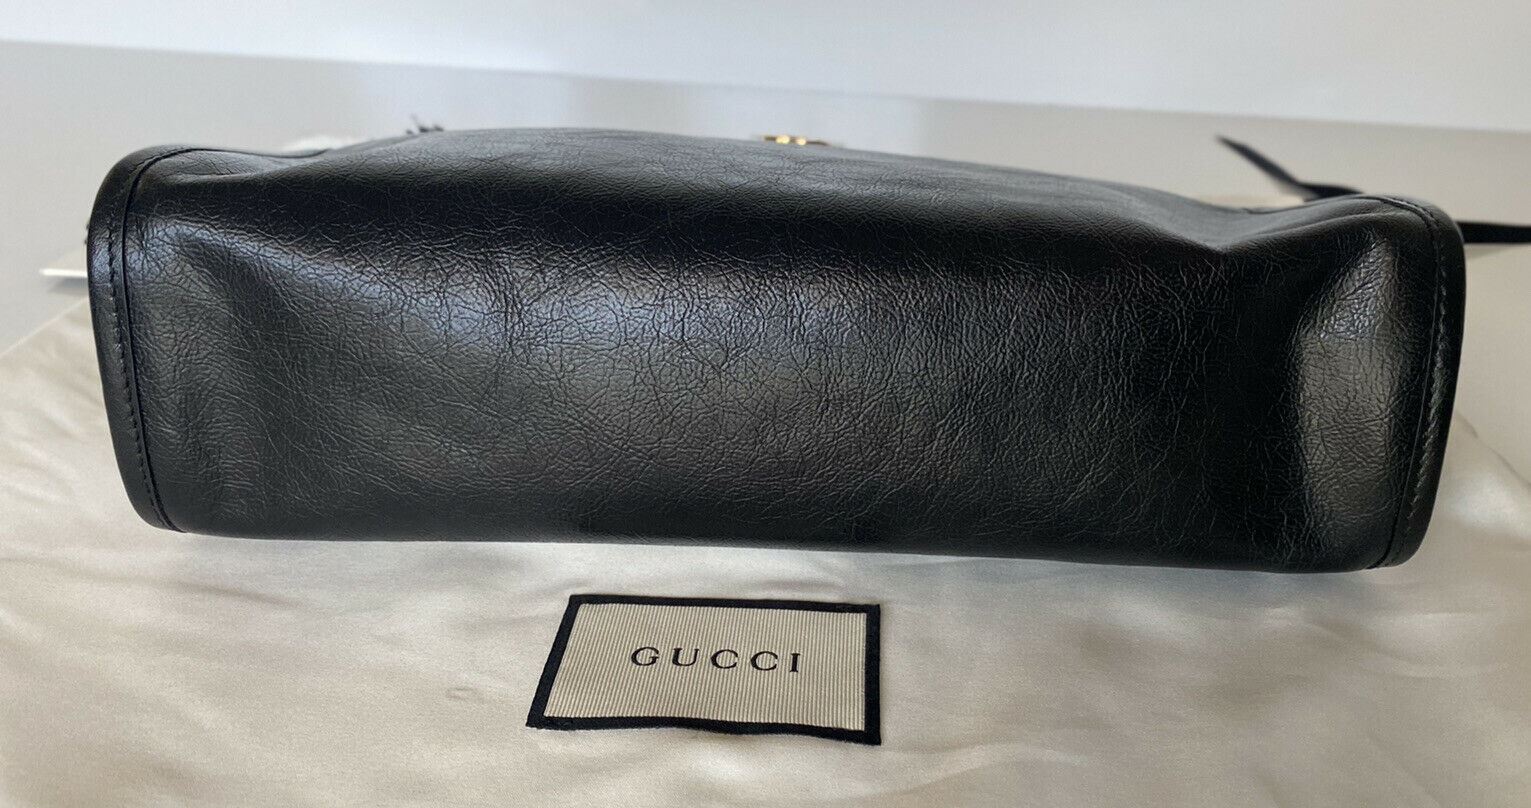 NWT Gucci Morpheus Косметичка Gucci Code Embossed Pouch, черная кожа 575991 